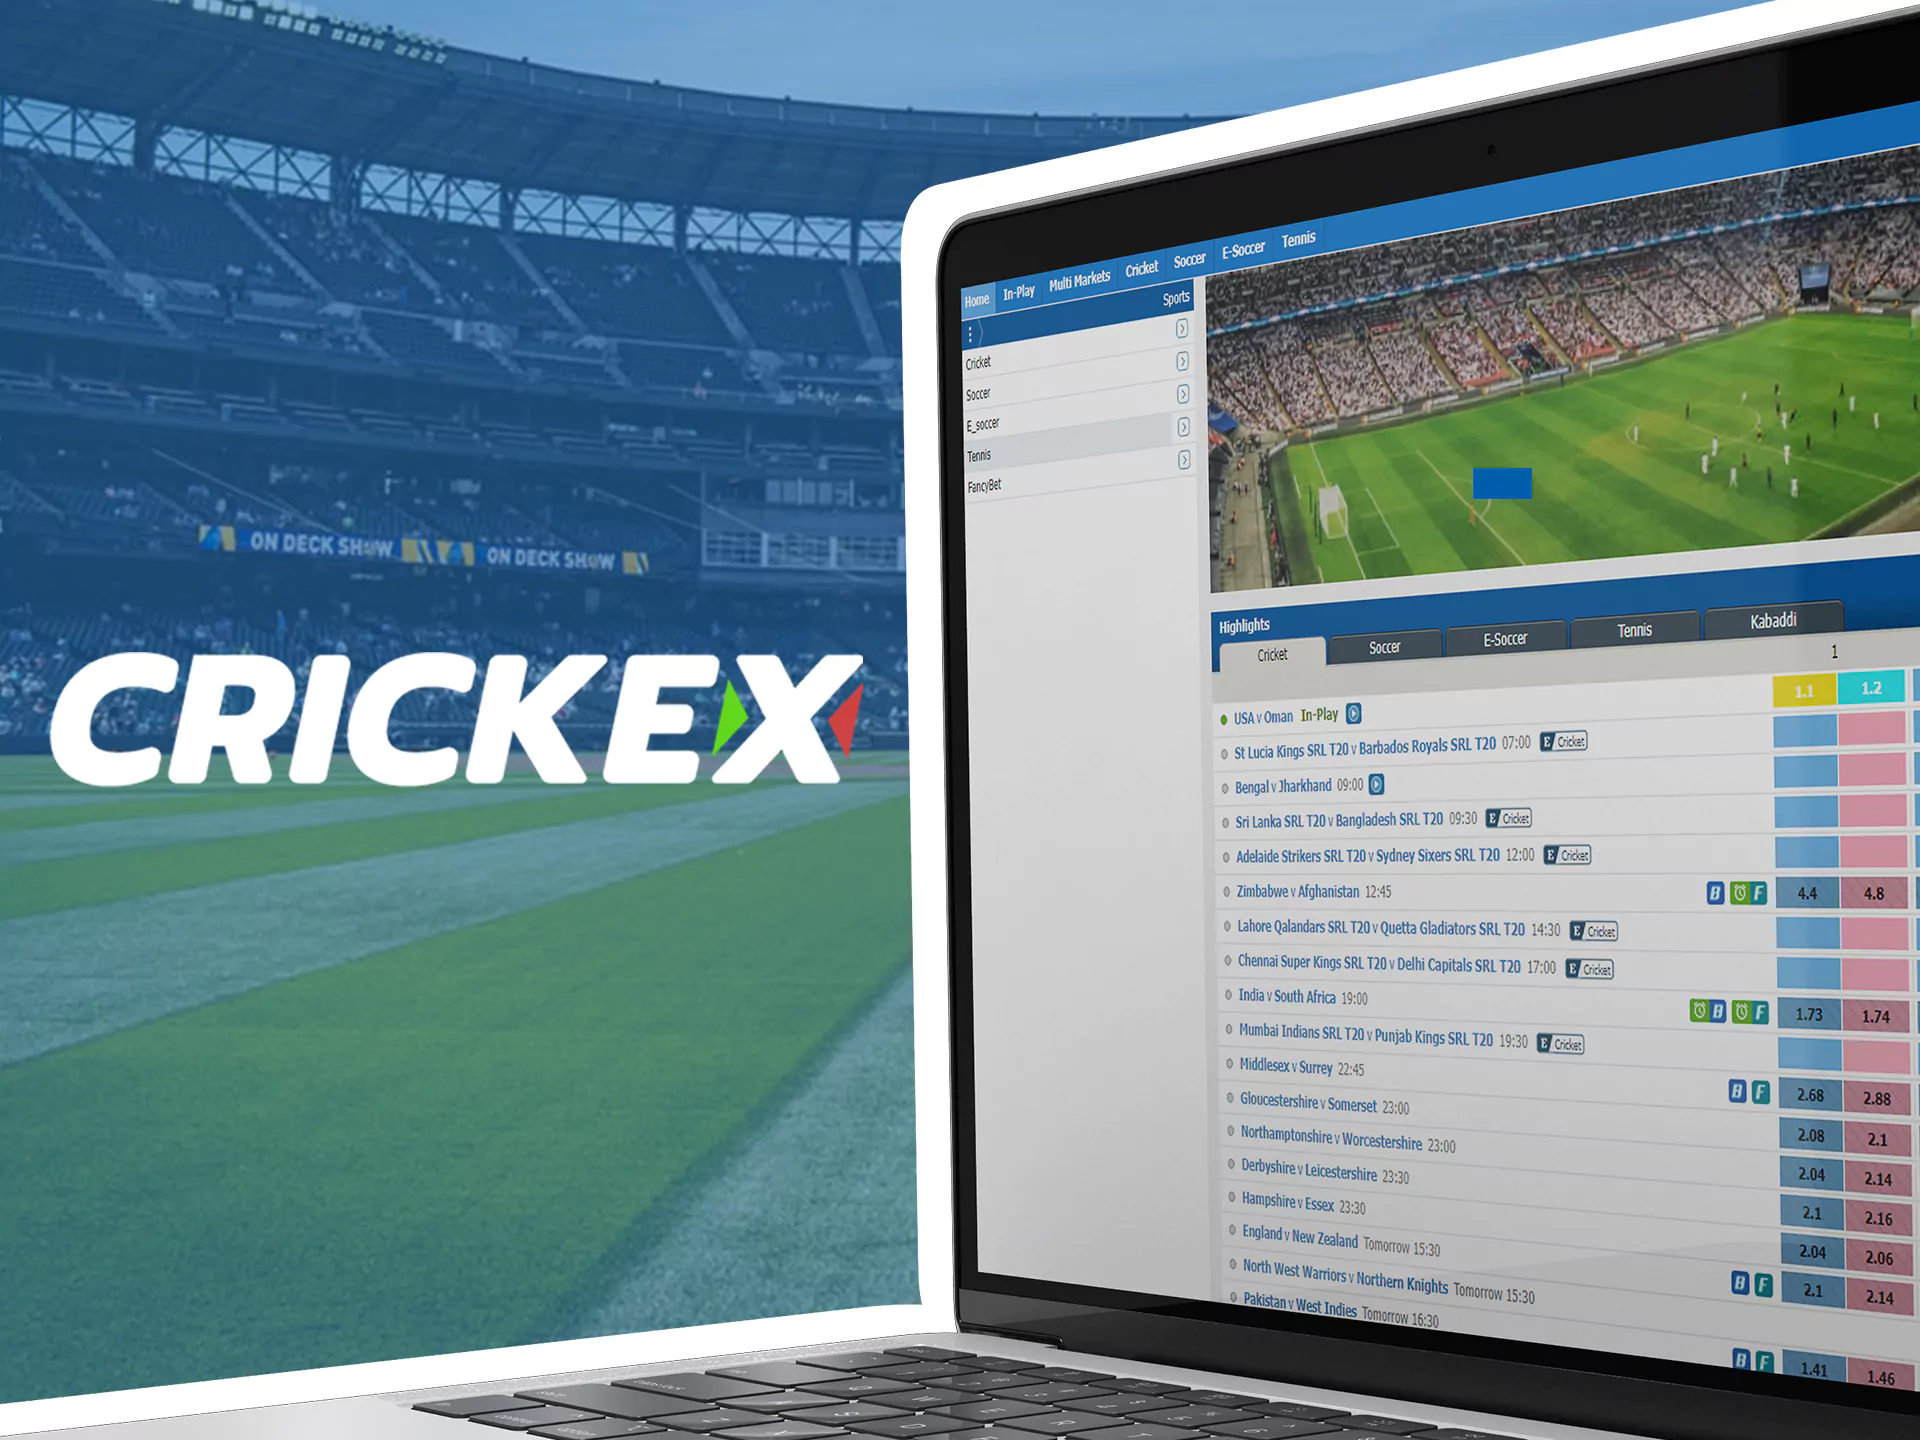 The official Crickex website operates legally in India.